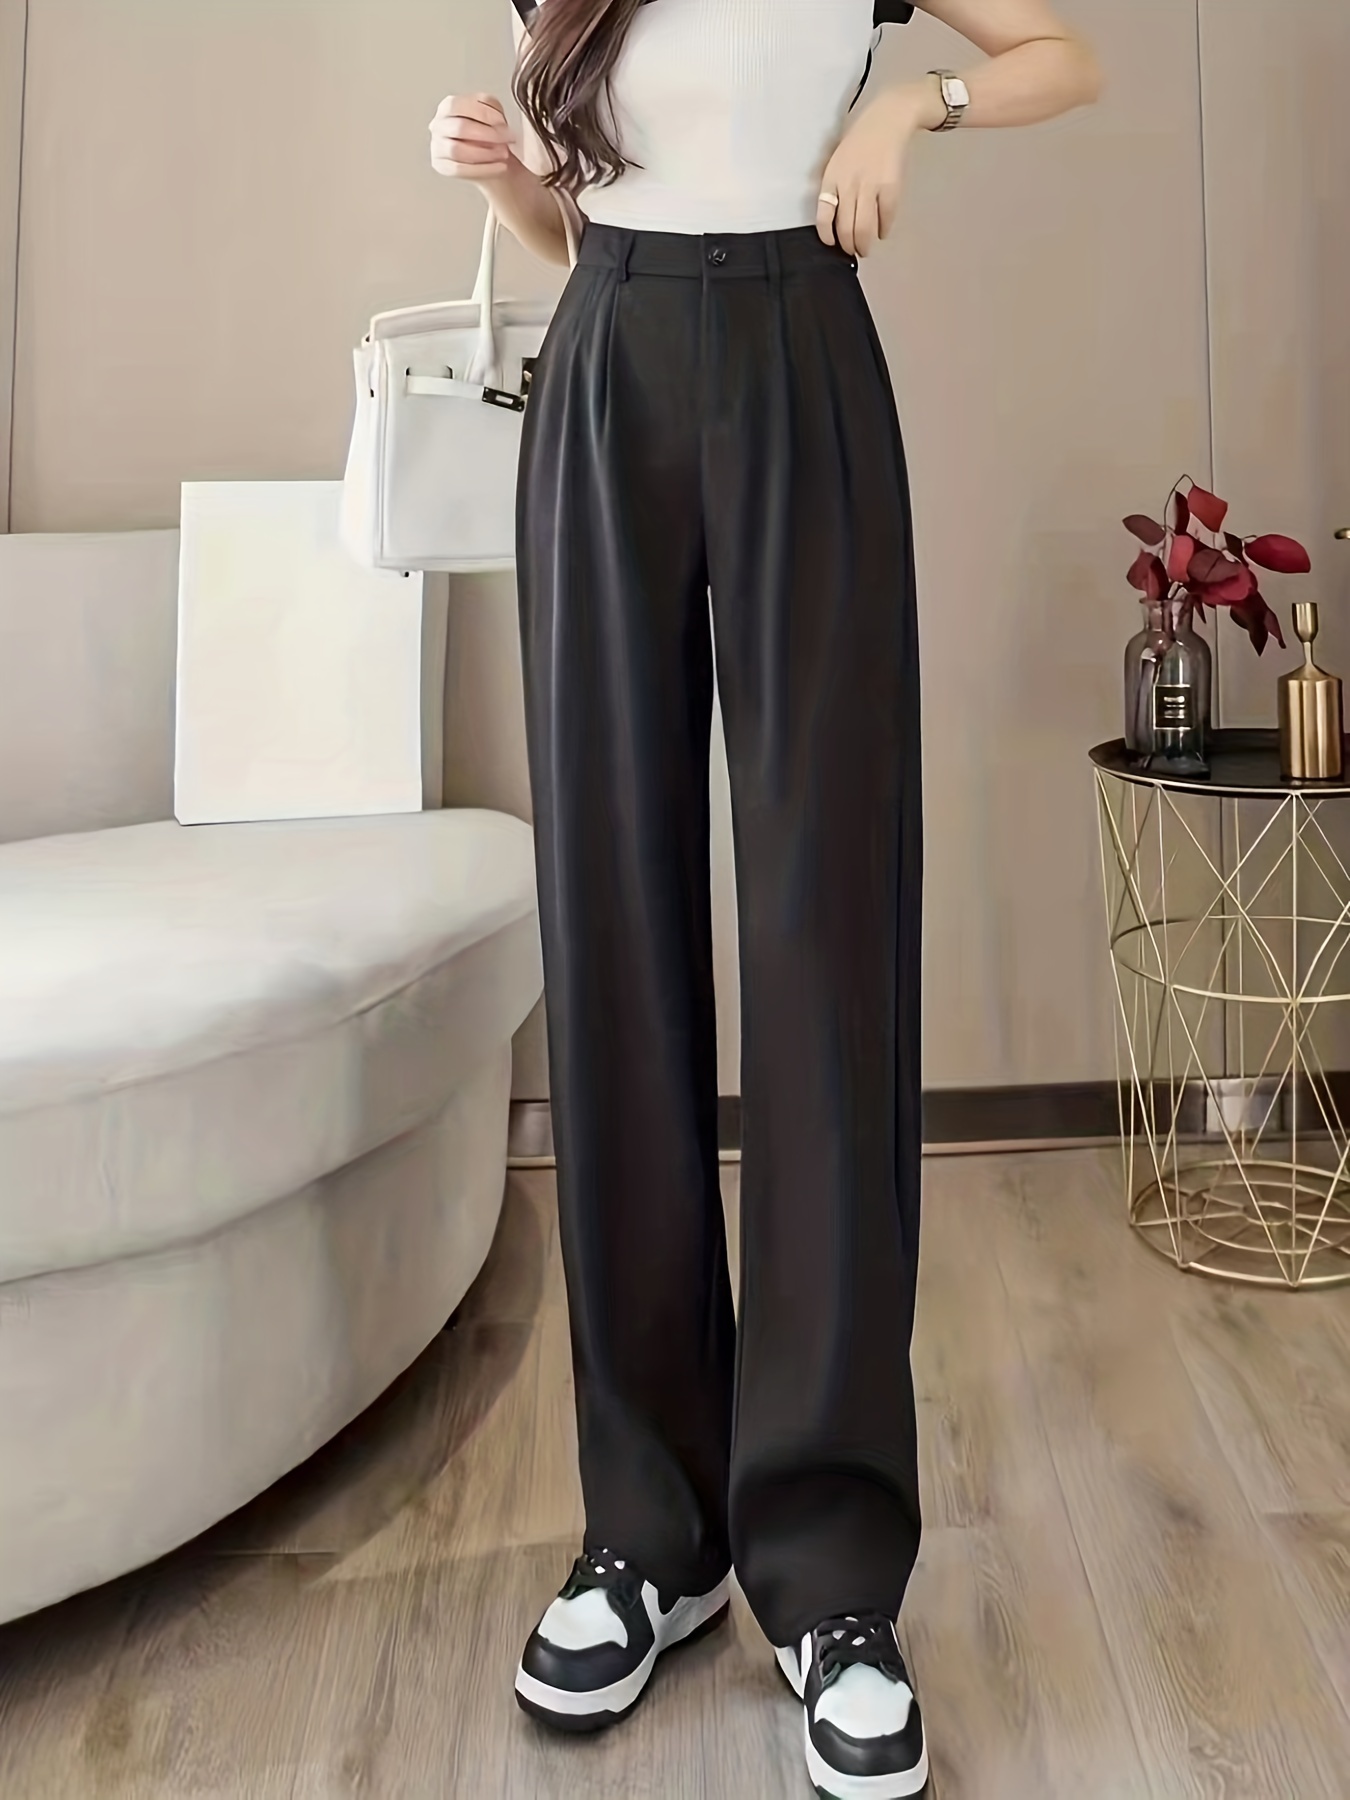 Grianlook Womens Work Dress Pants Office Business Casual Slacks Ladies  Regular Straight Leg Trousers with Pockets Light Gray XL